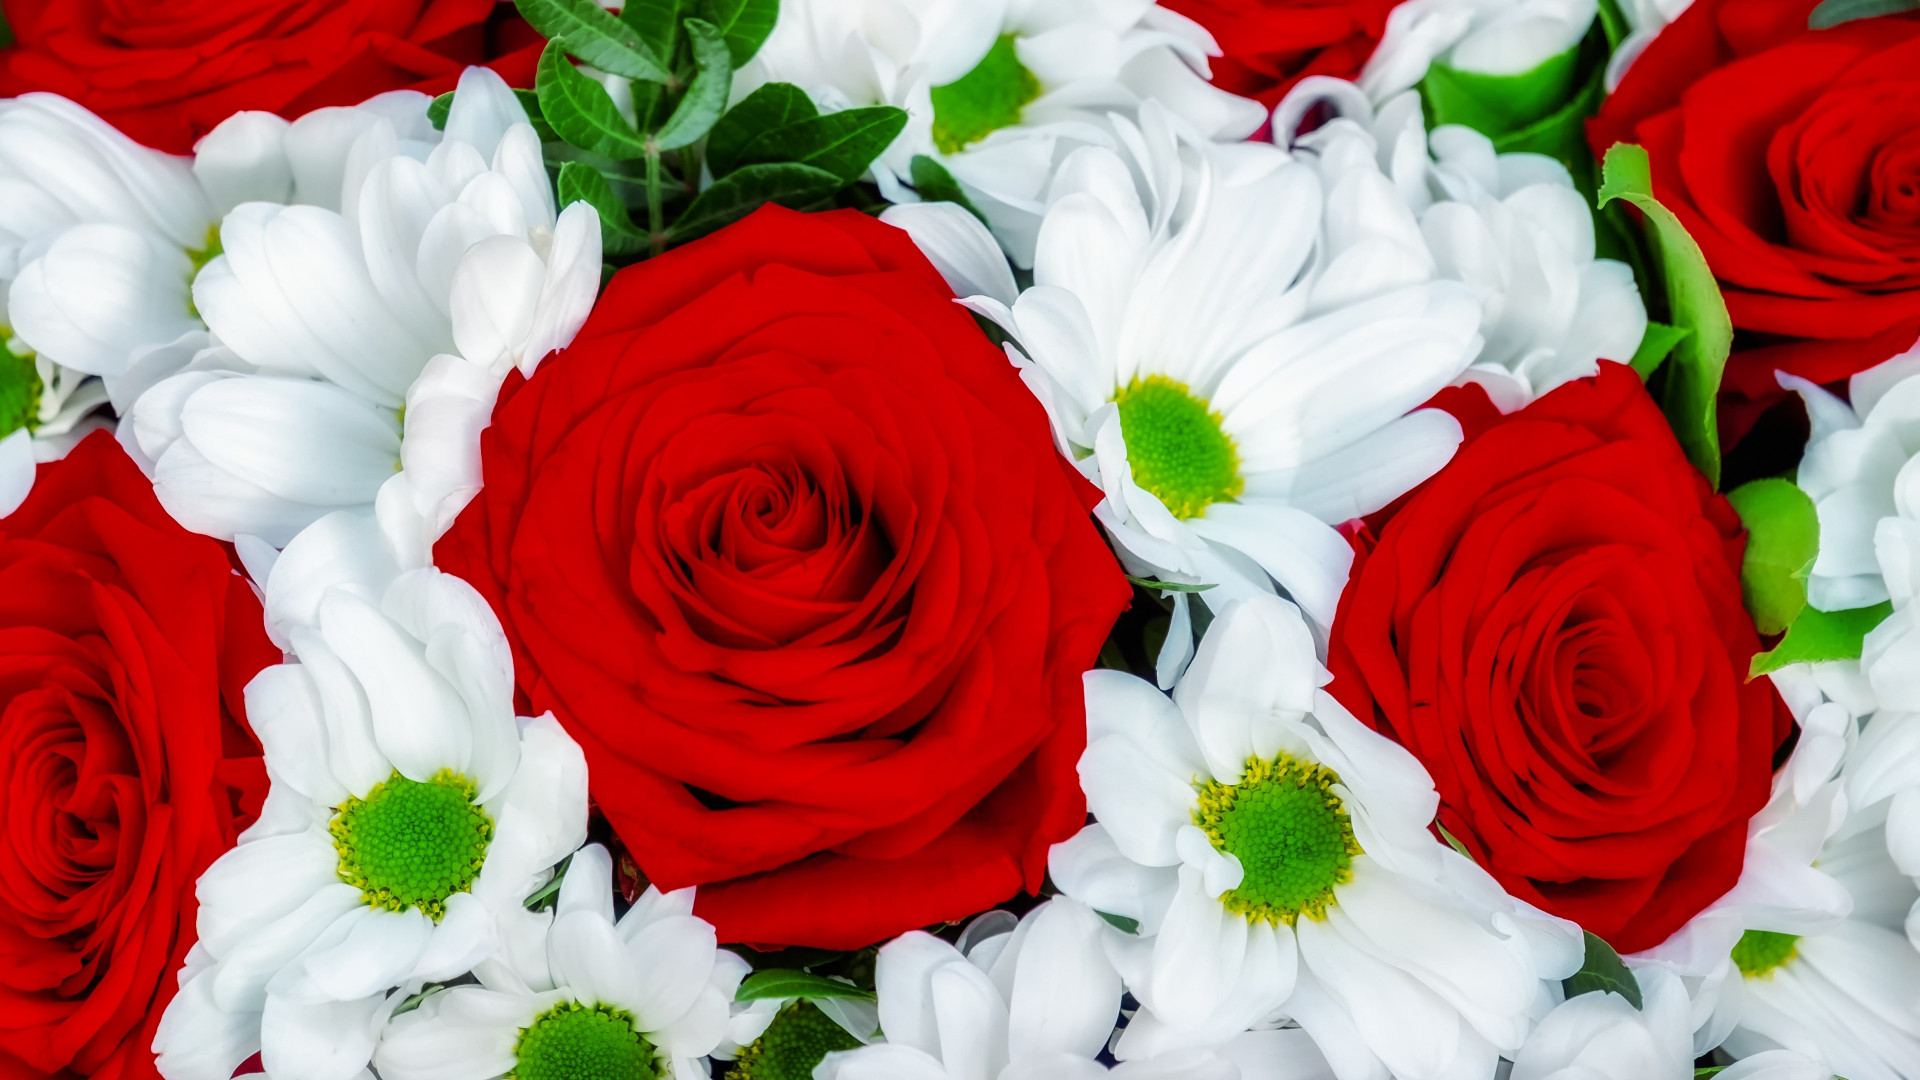 Roses and daisies bouquet wallpaper 1920x1080